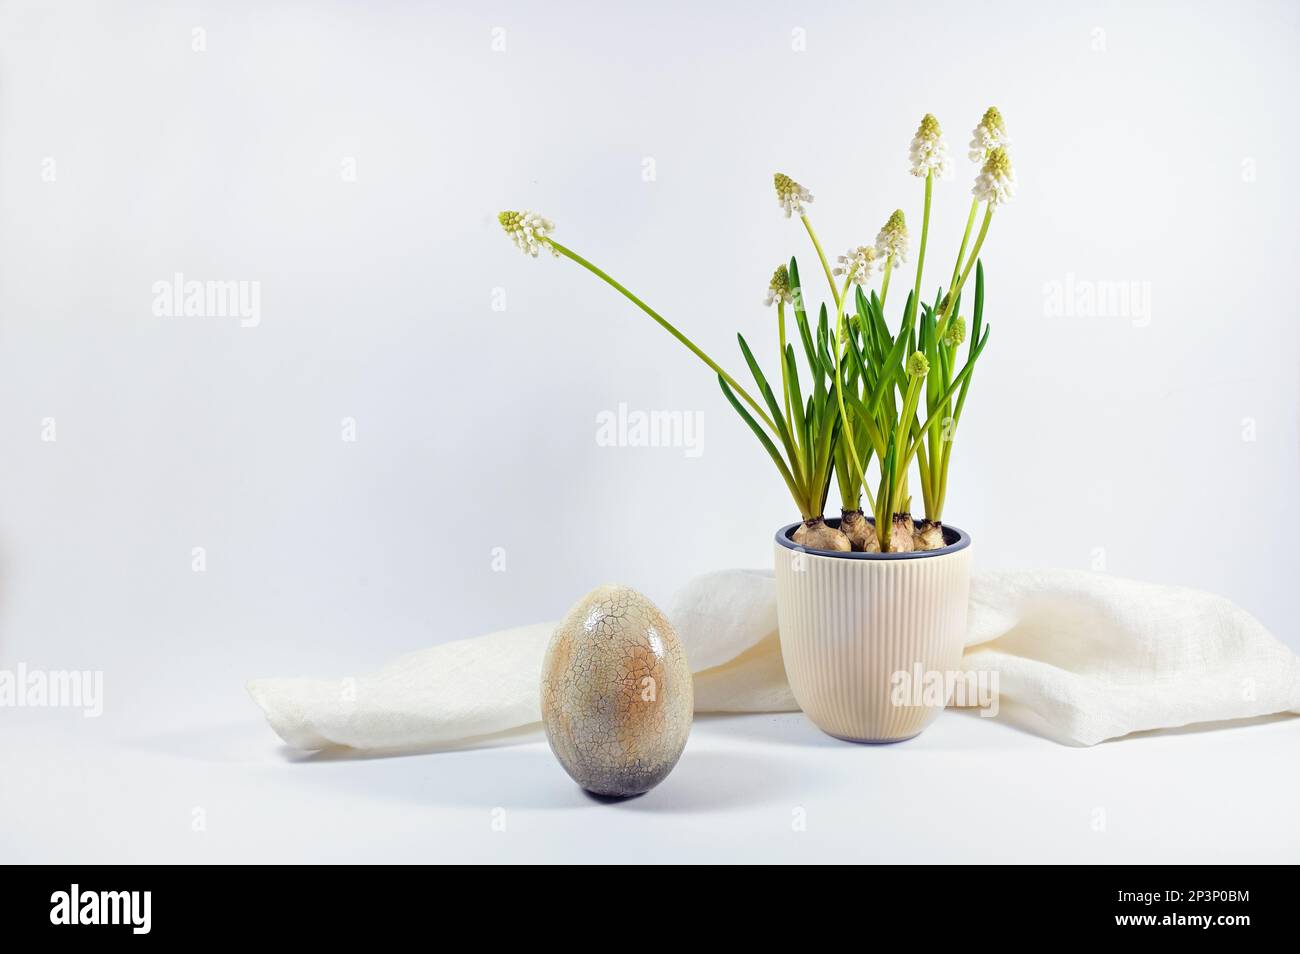 Easter egg with beige brown craquelure surface and a ceramic flowerpot with white grape hyacinths against a light gray background, home decoration and Stock Photo